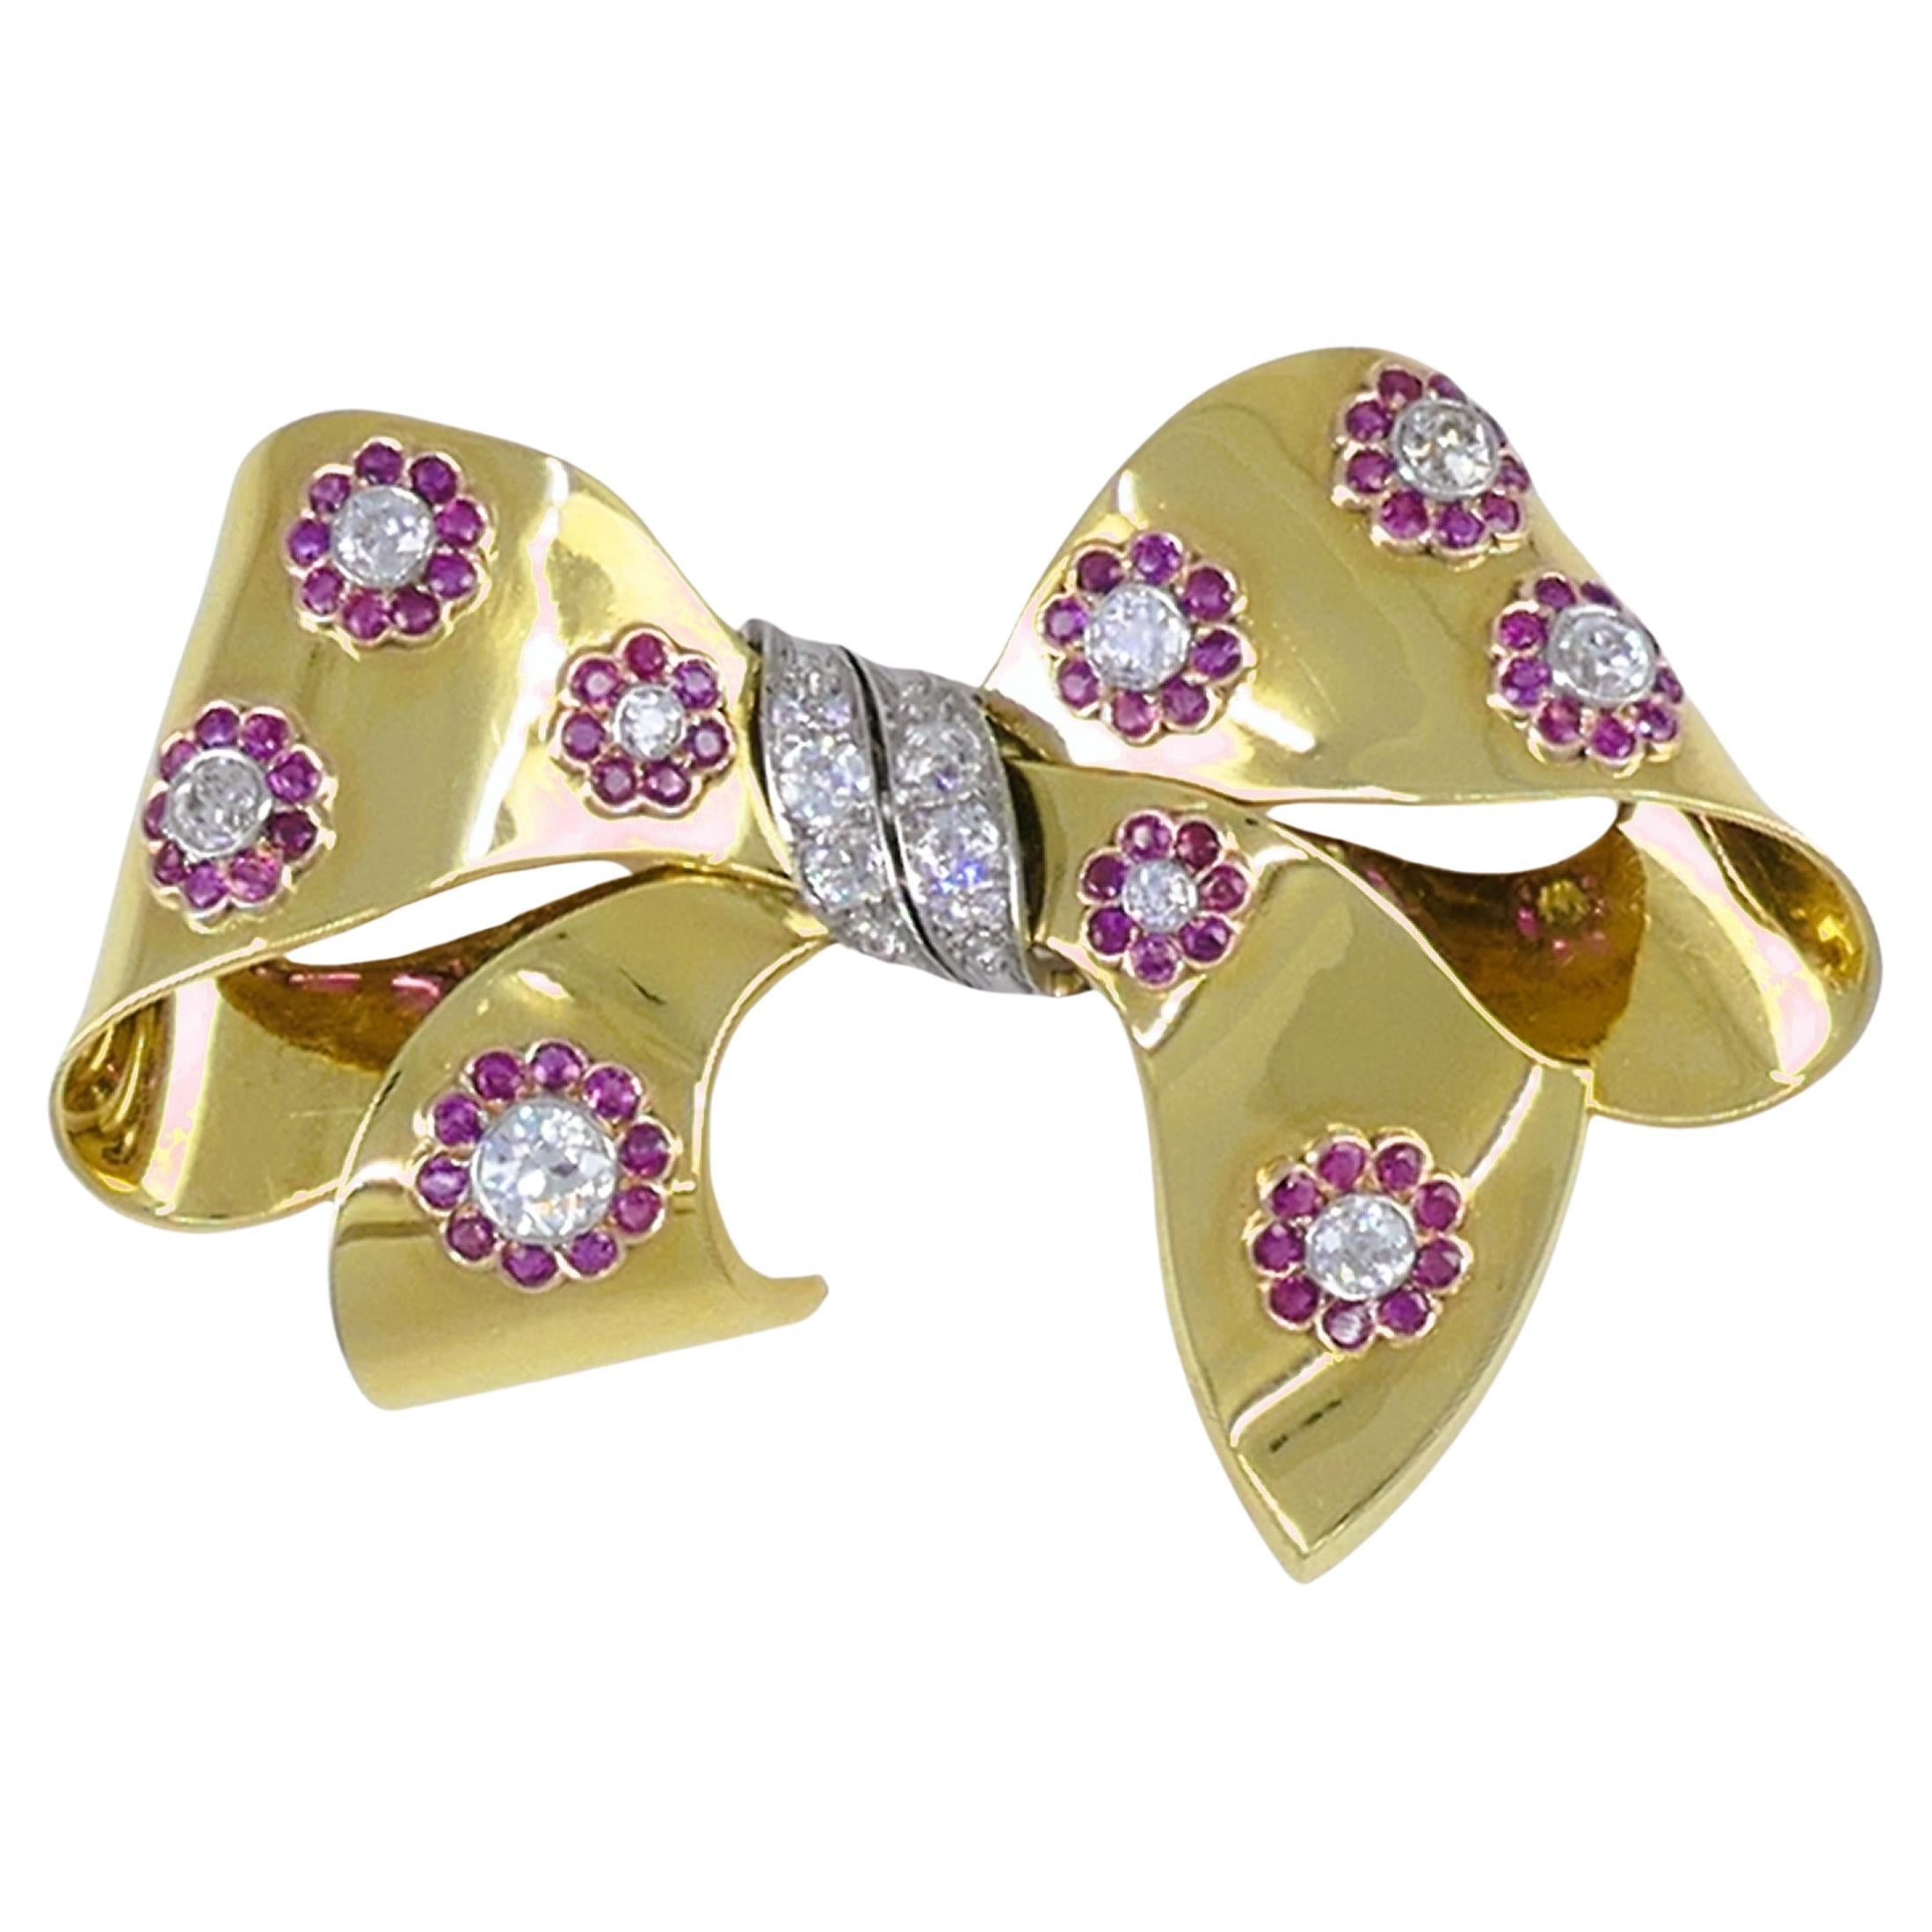 Retro Bow Brooch Pin 18k Gold Ruby Diamond Estate Jewelry For Sale